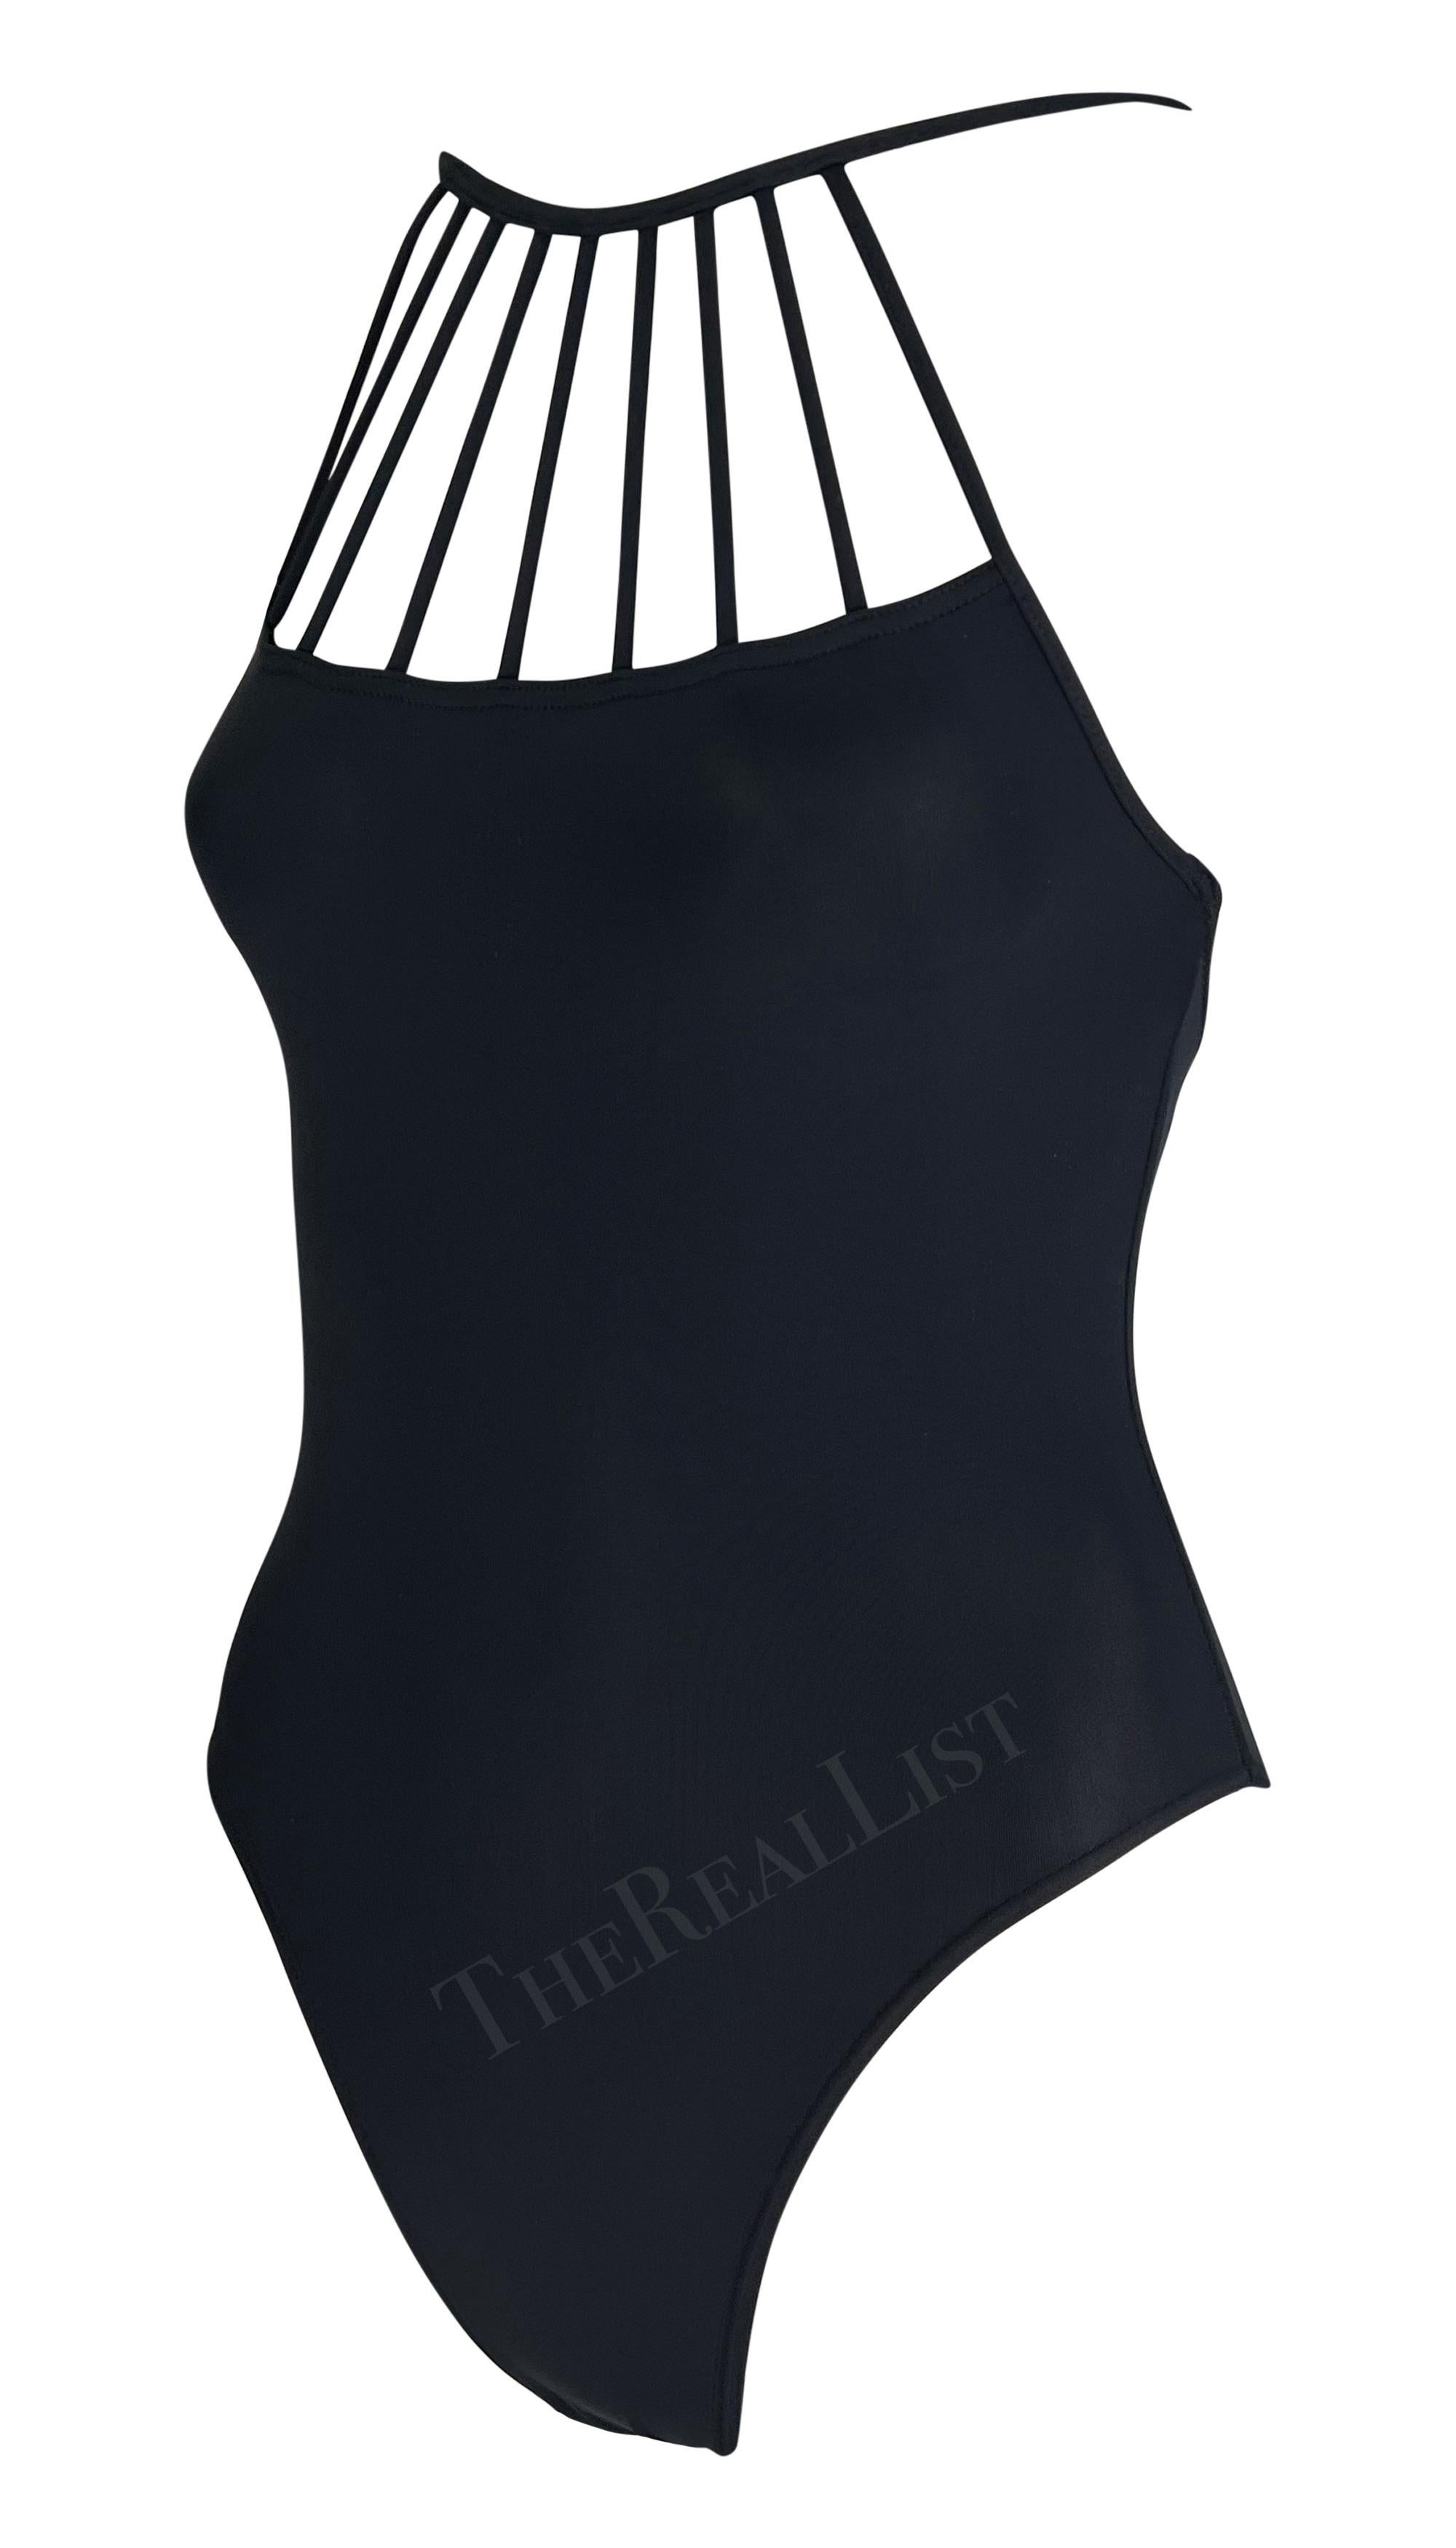 S/S 1998 Herve Leger Black One Piece Body Suit Swimsuit Bodysuit In Excellent Condition For Sale In West Hollywood, CA